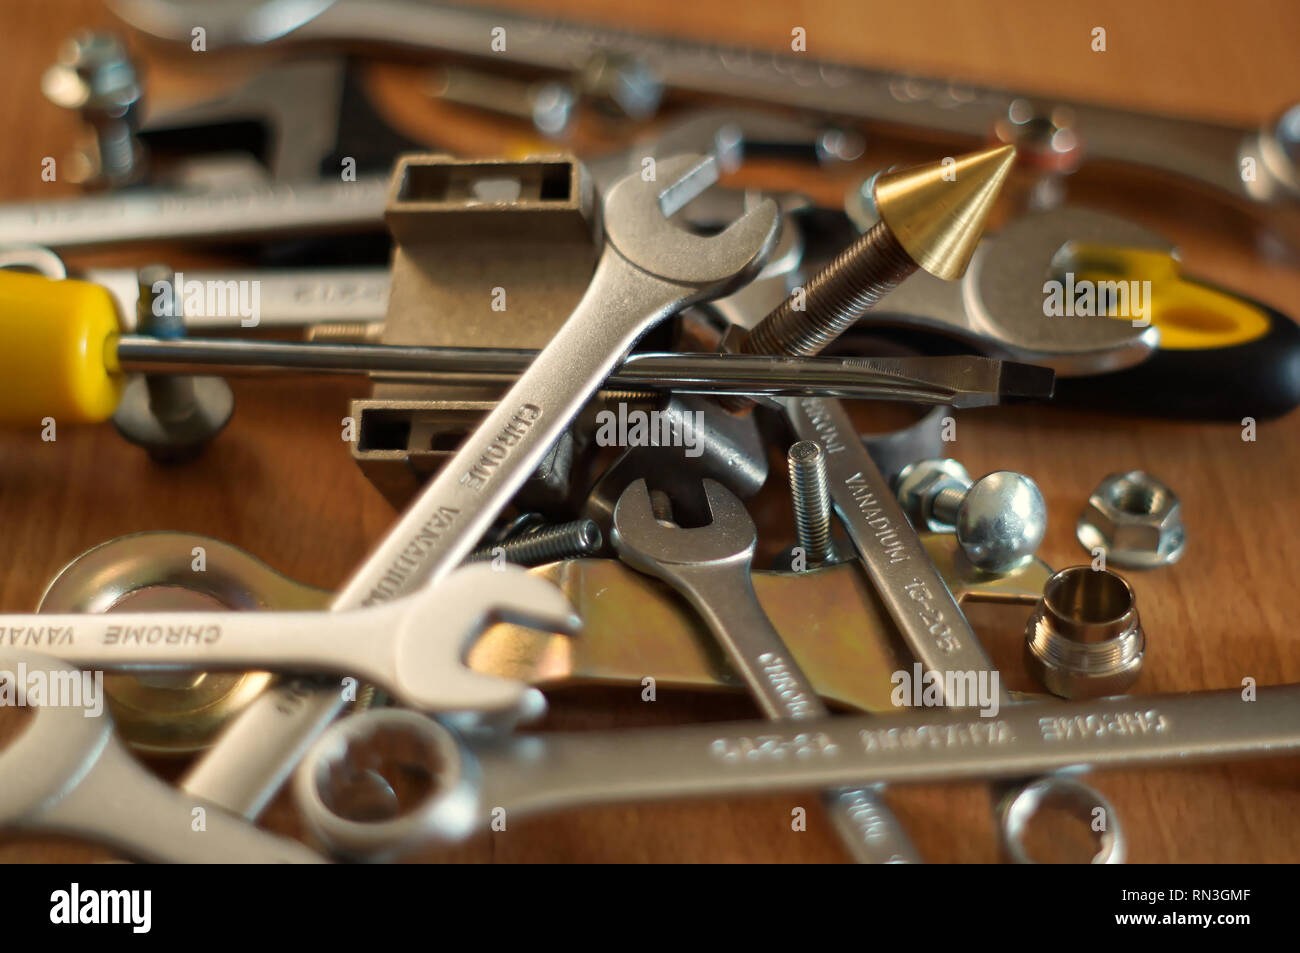 Do It Yourself DIY accessories - locksmith tools, wrenches, screwdrivers, nuts and bolts on a wooden table Stock Photo